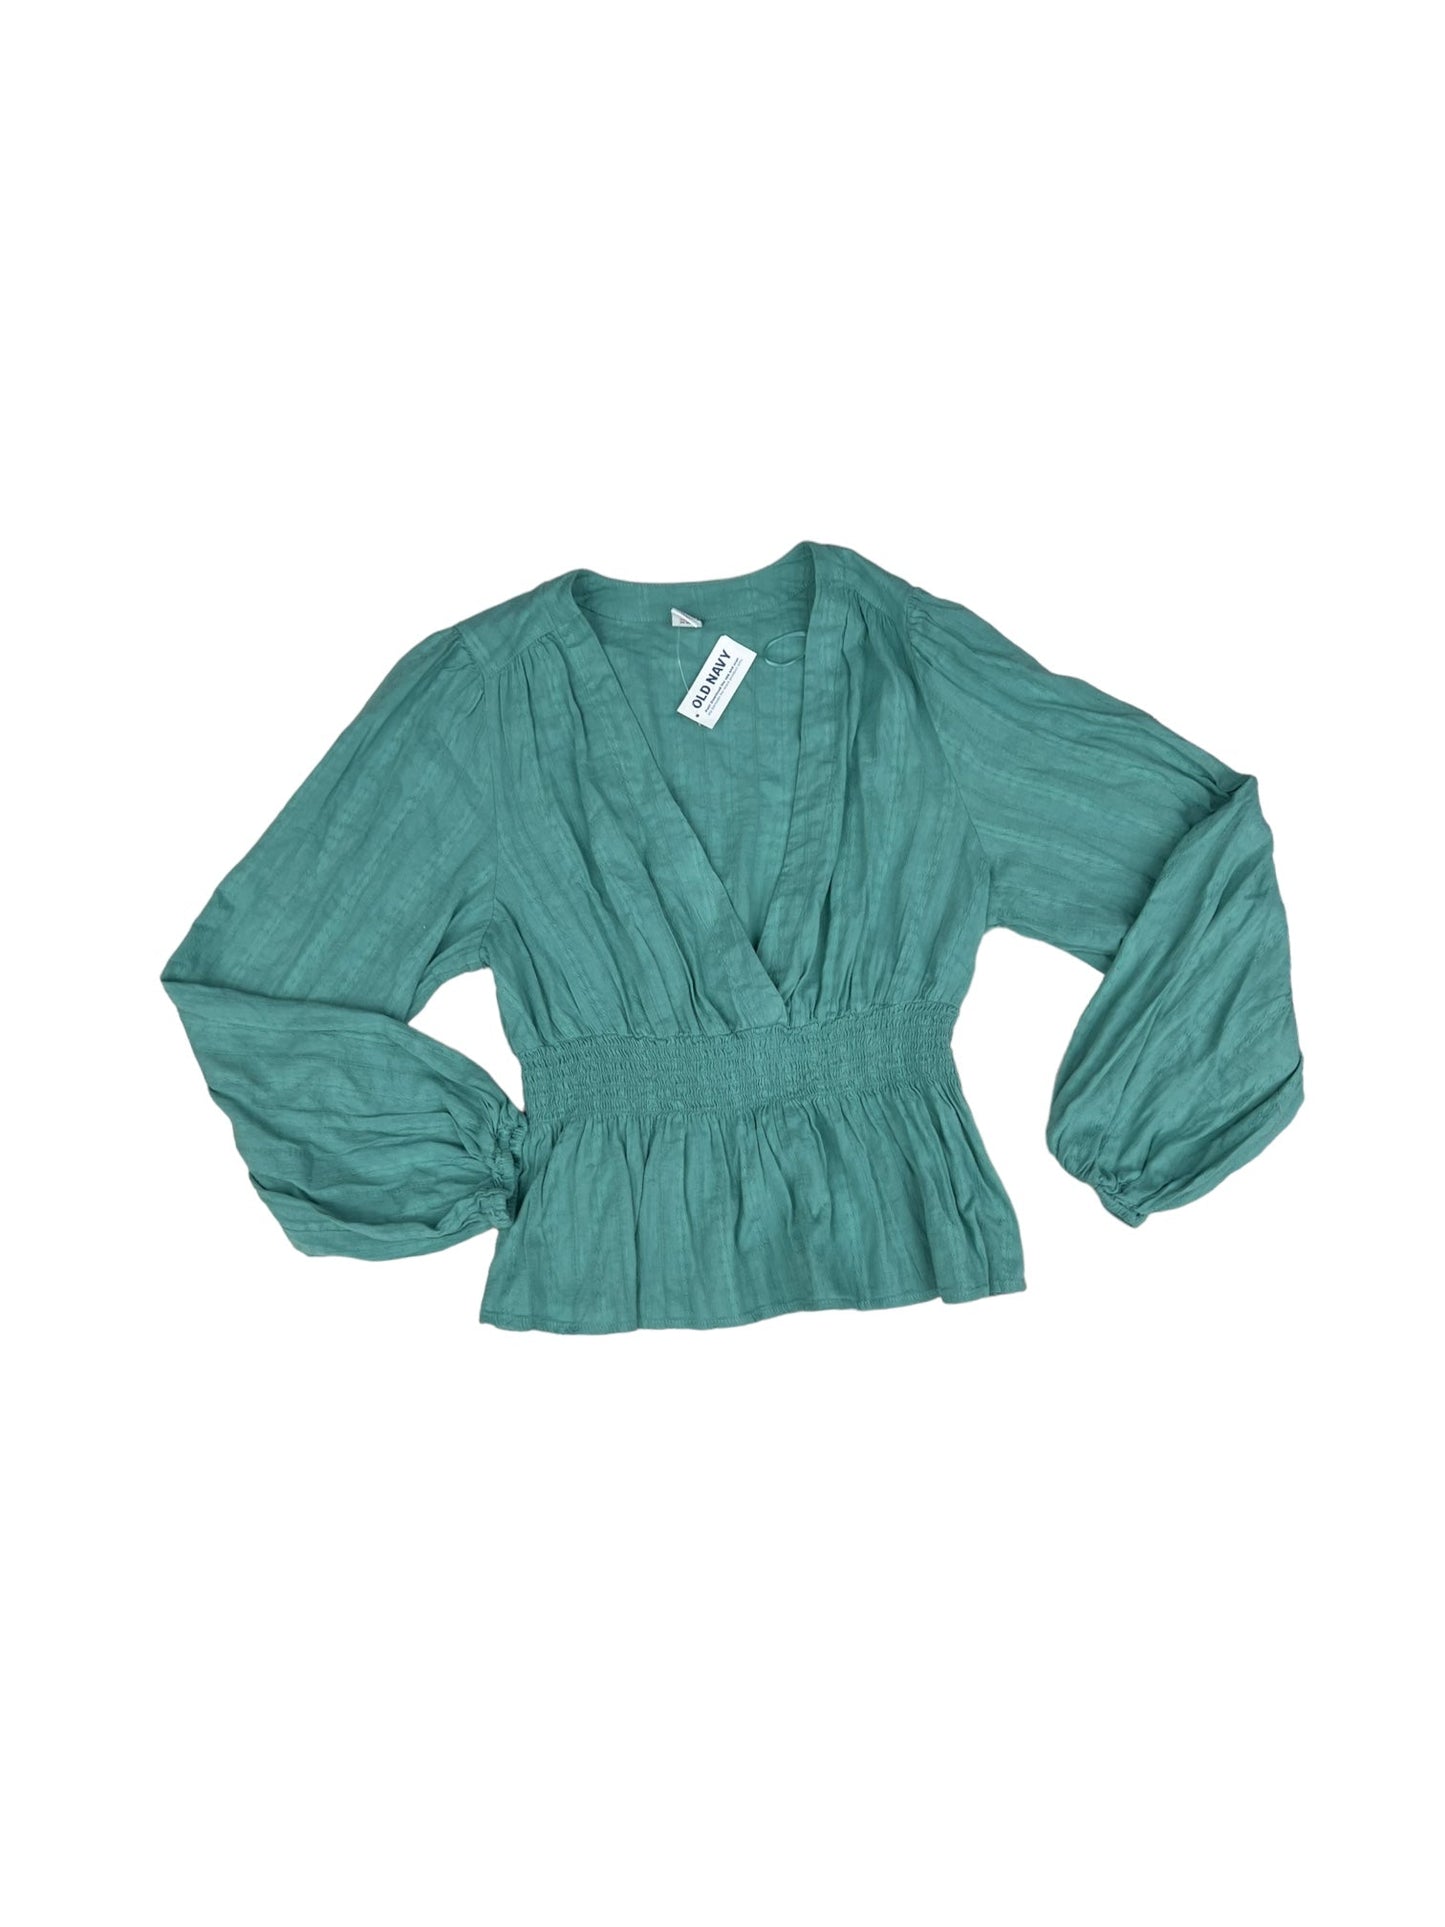 Teal Top Long Sleeve Old Navy, Size S